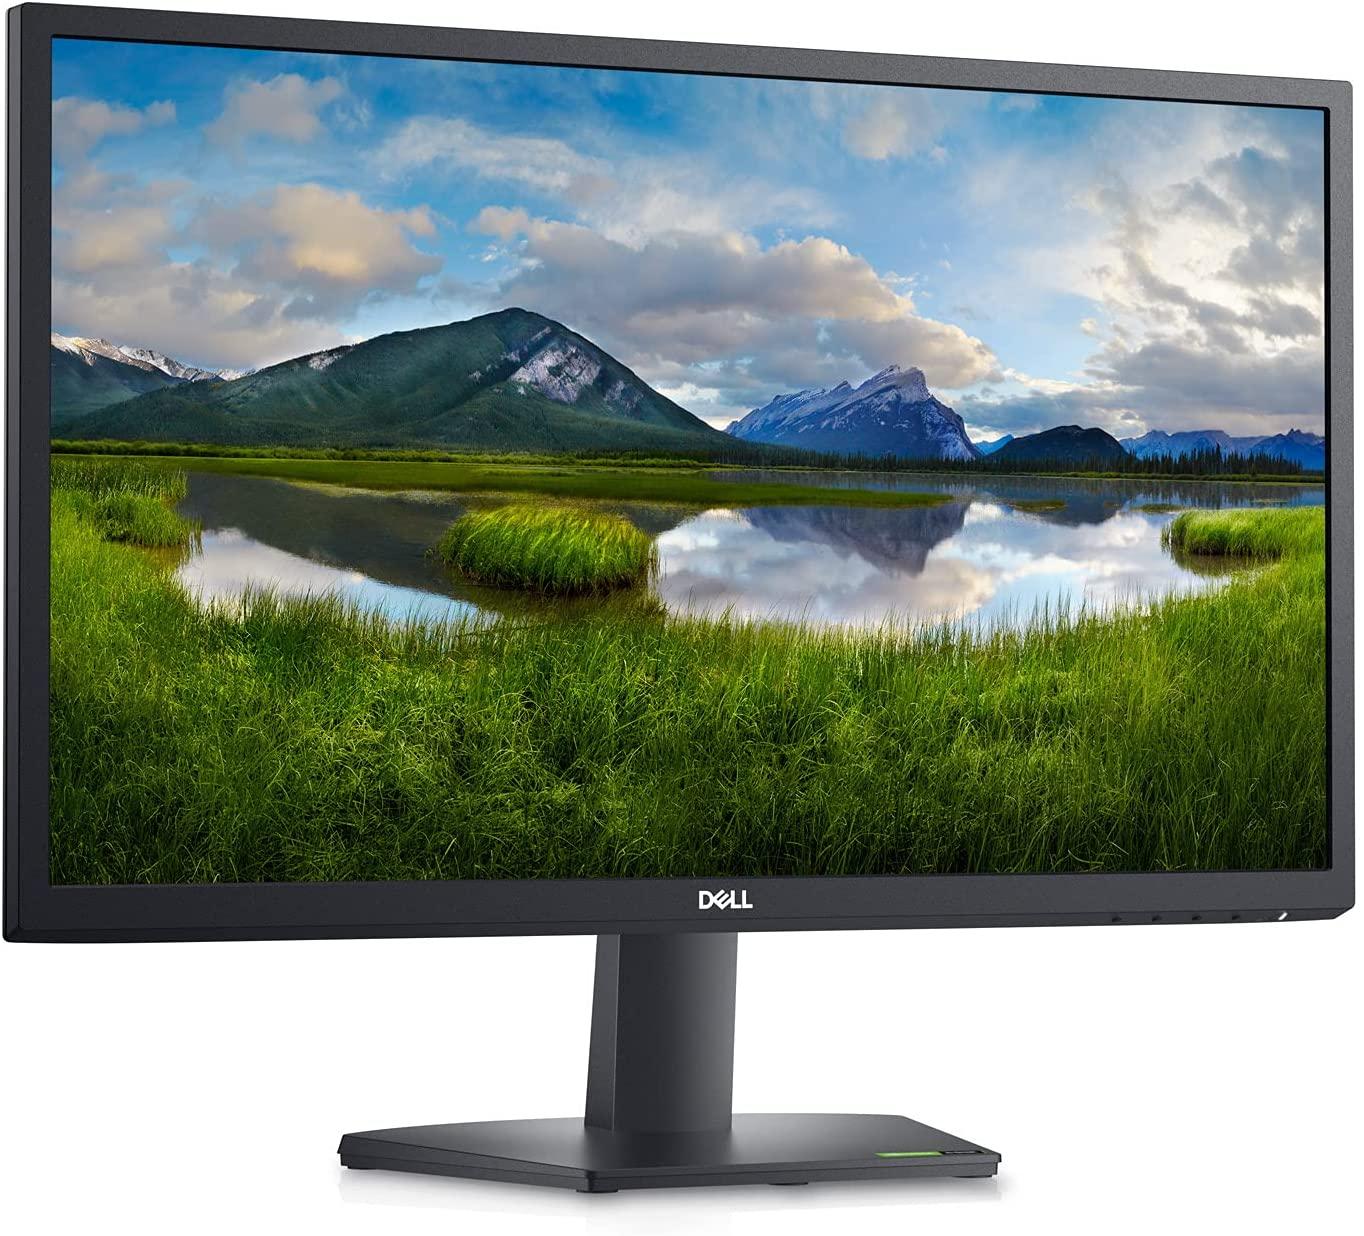 24in Dell SE2422H Full HD VA Monitor with $50 Gift Card for $149.99 Shipped